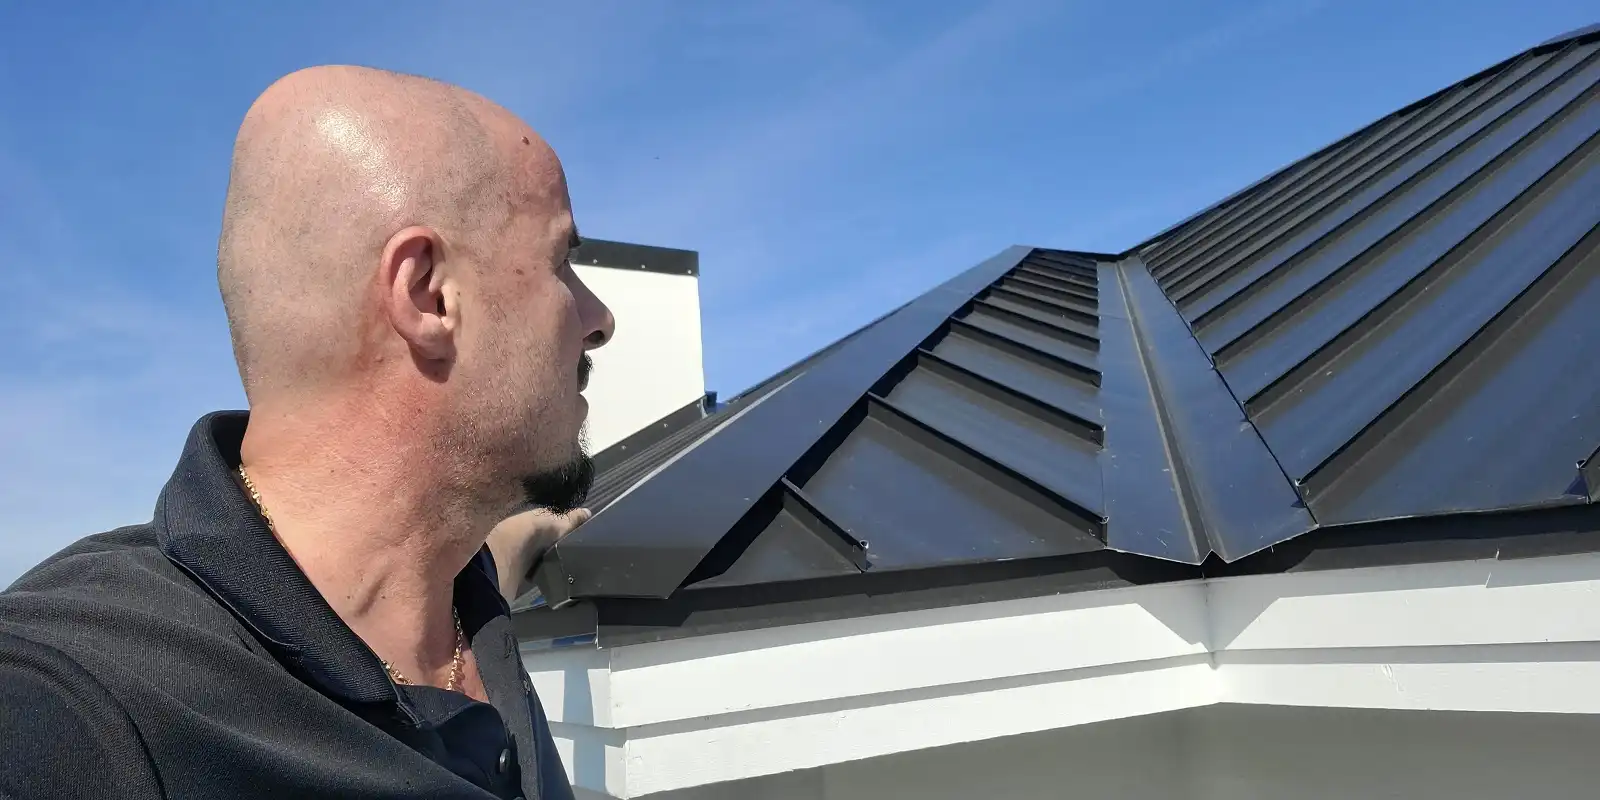 Roof wind mitigation inspection